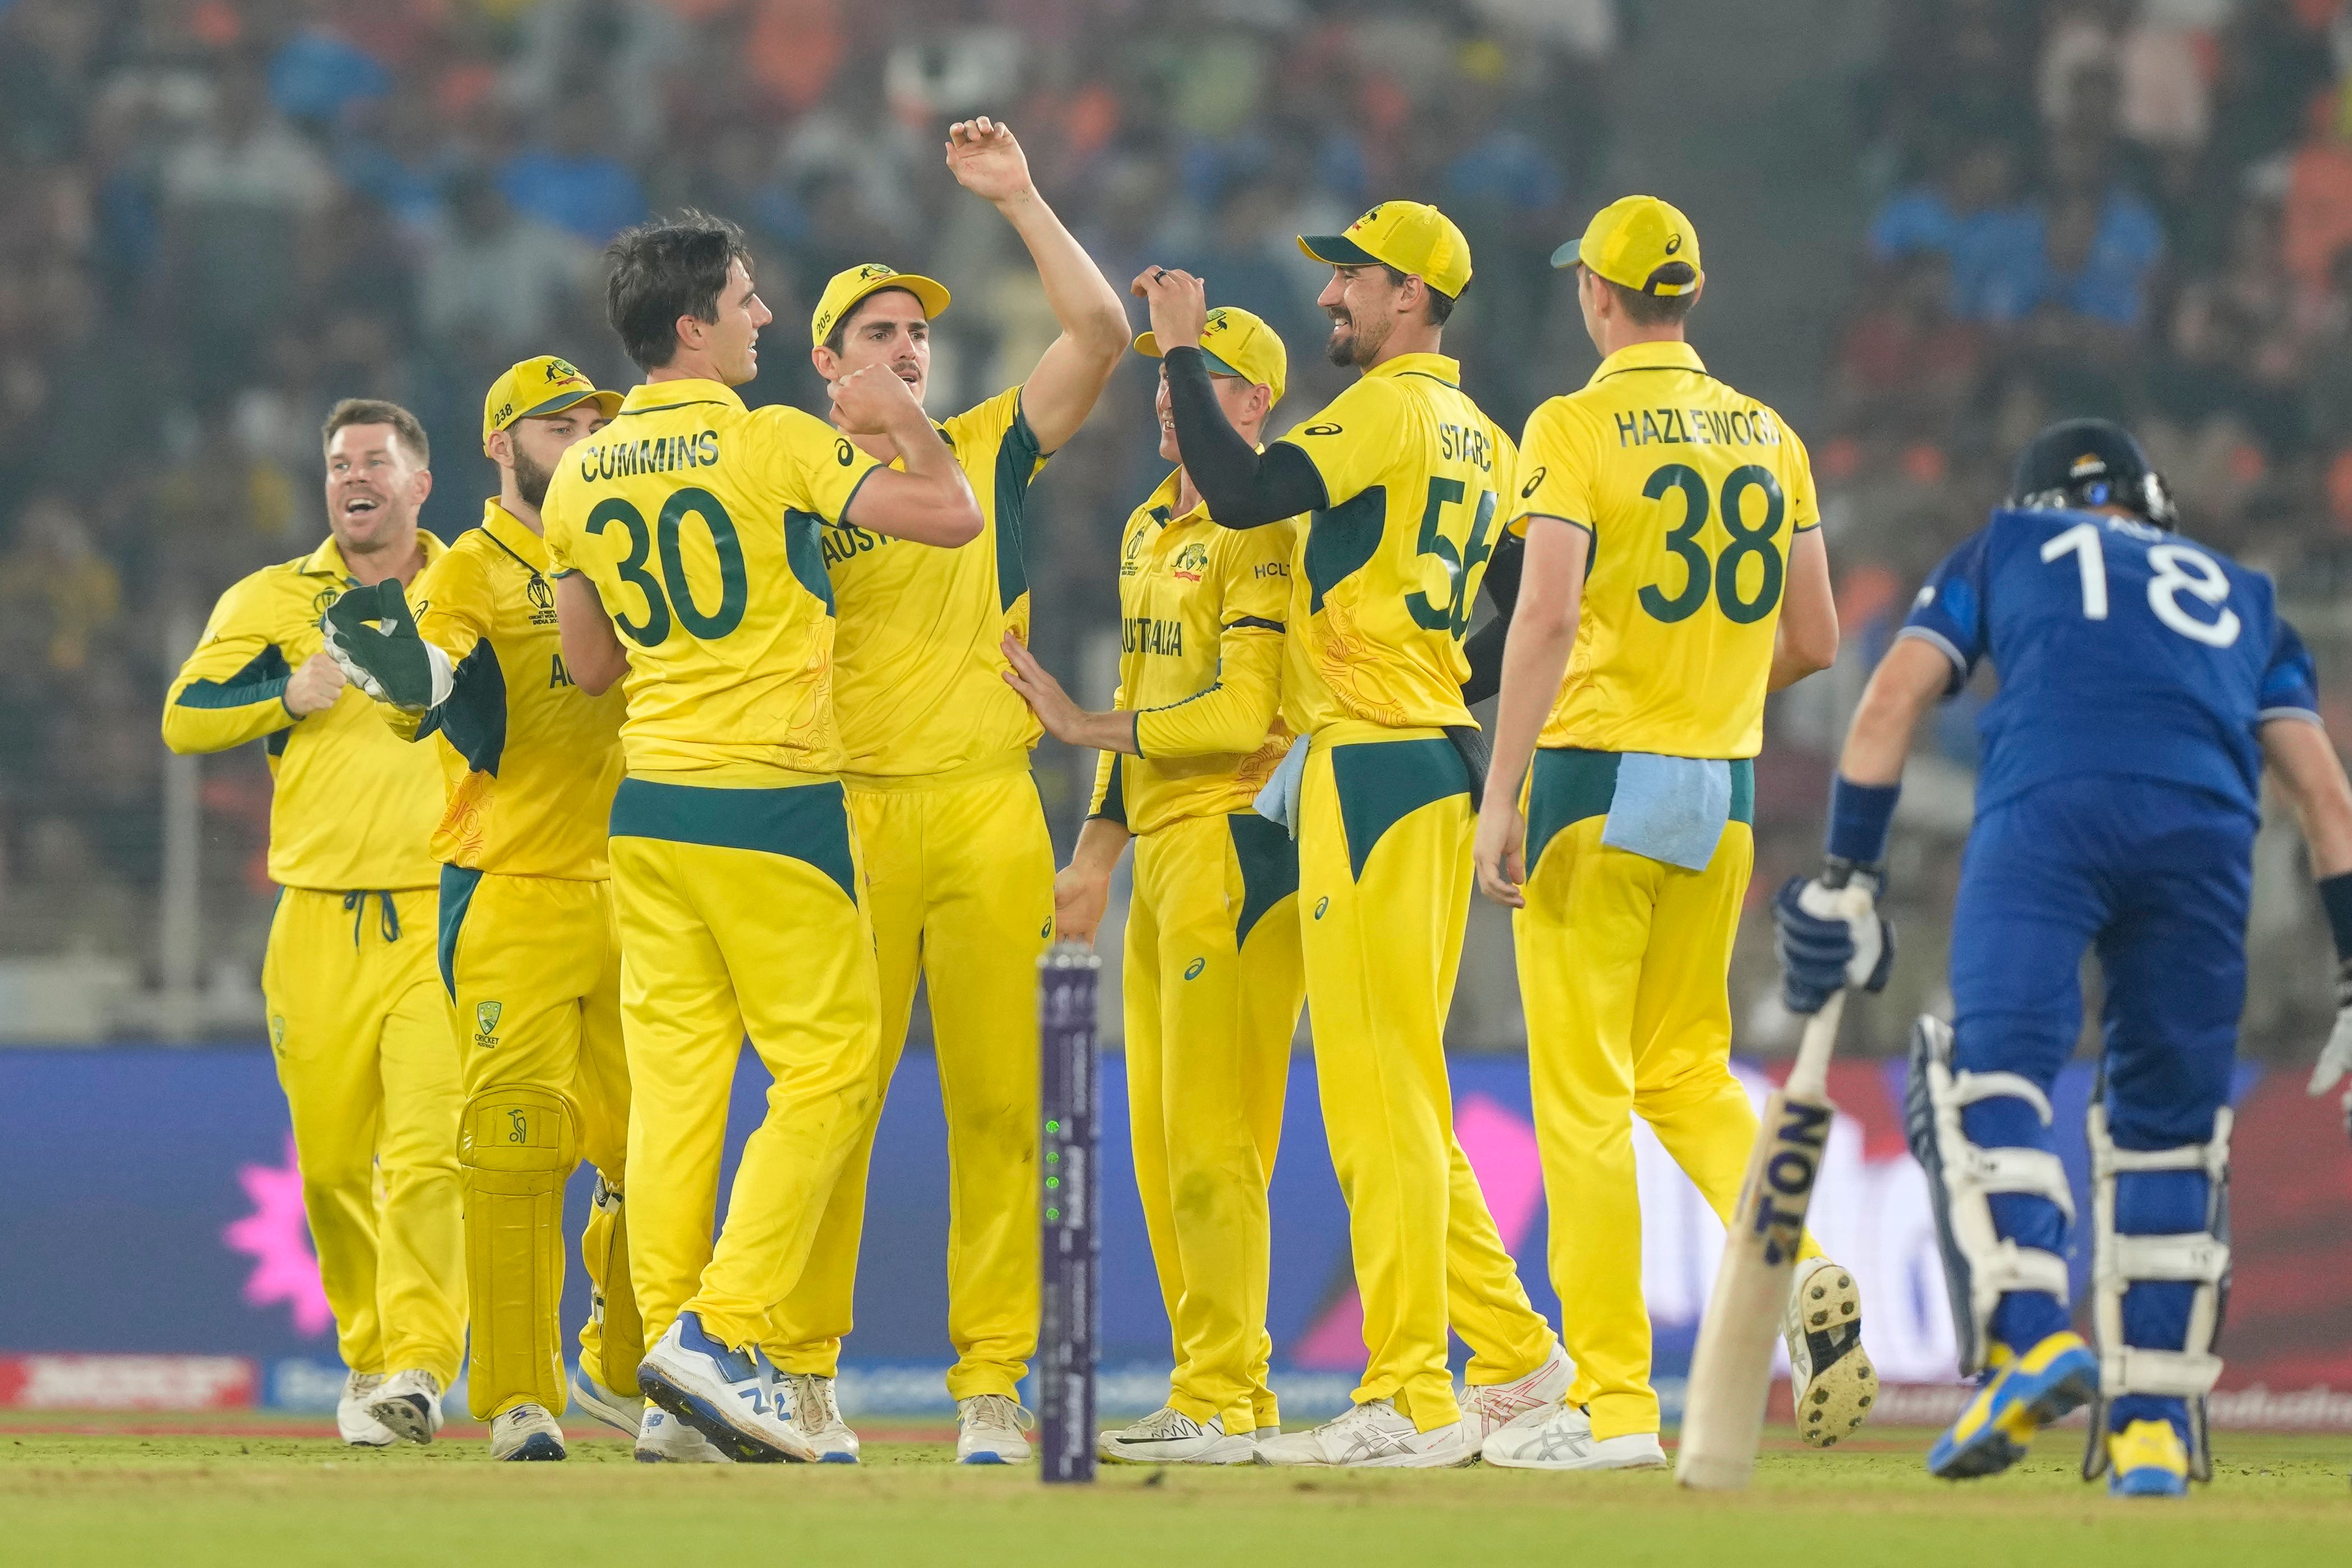 Australia beat England by 33 runs, knocking the defending champions out of the tournament